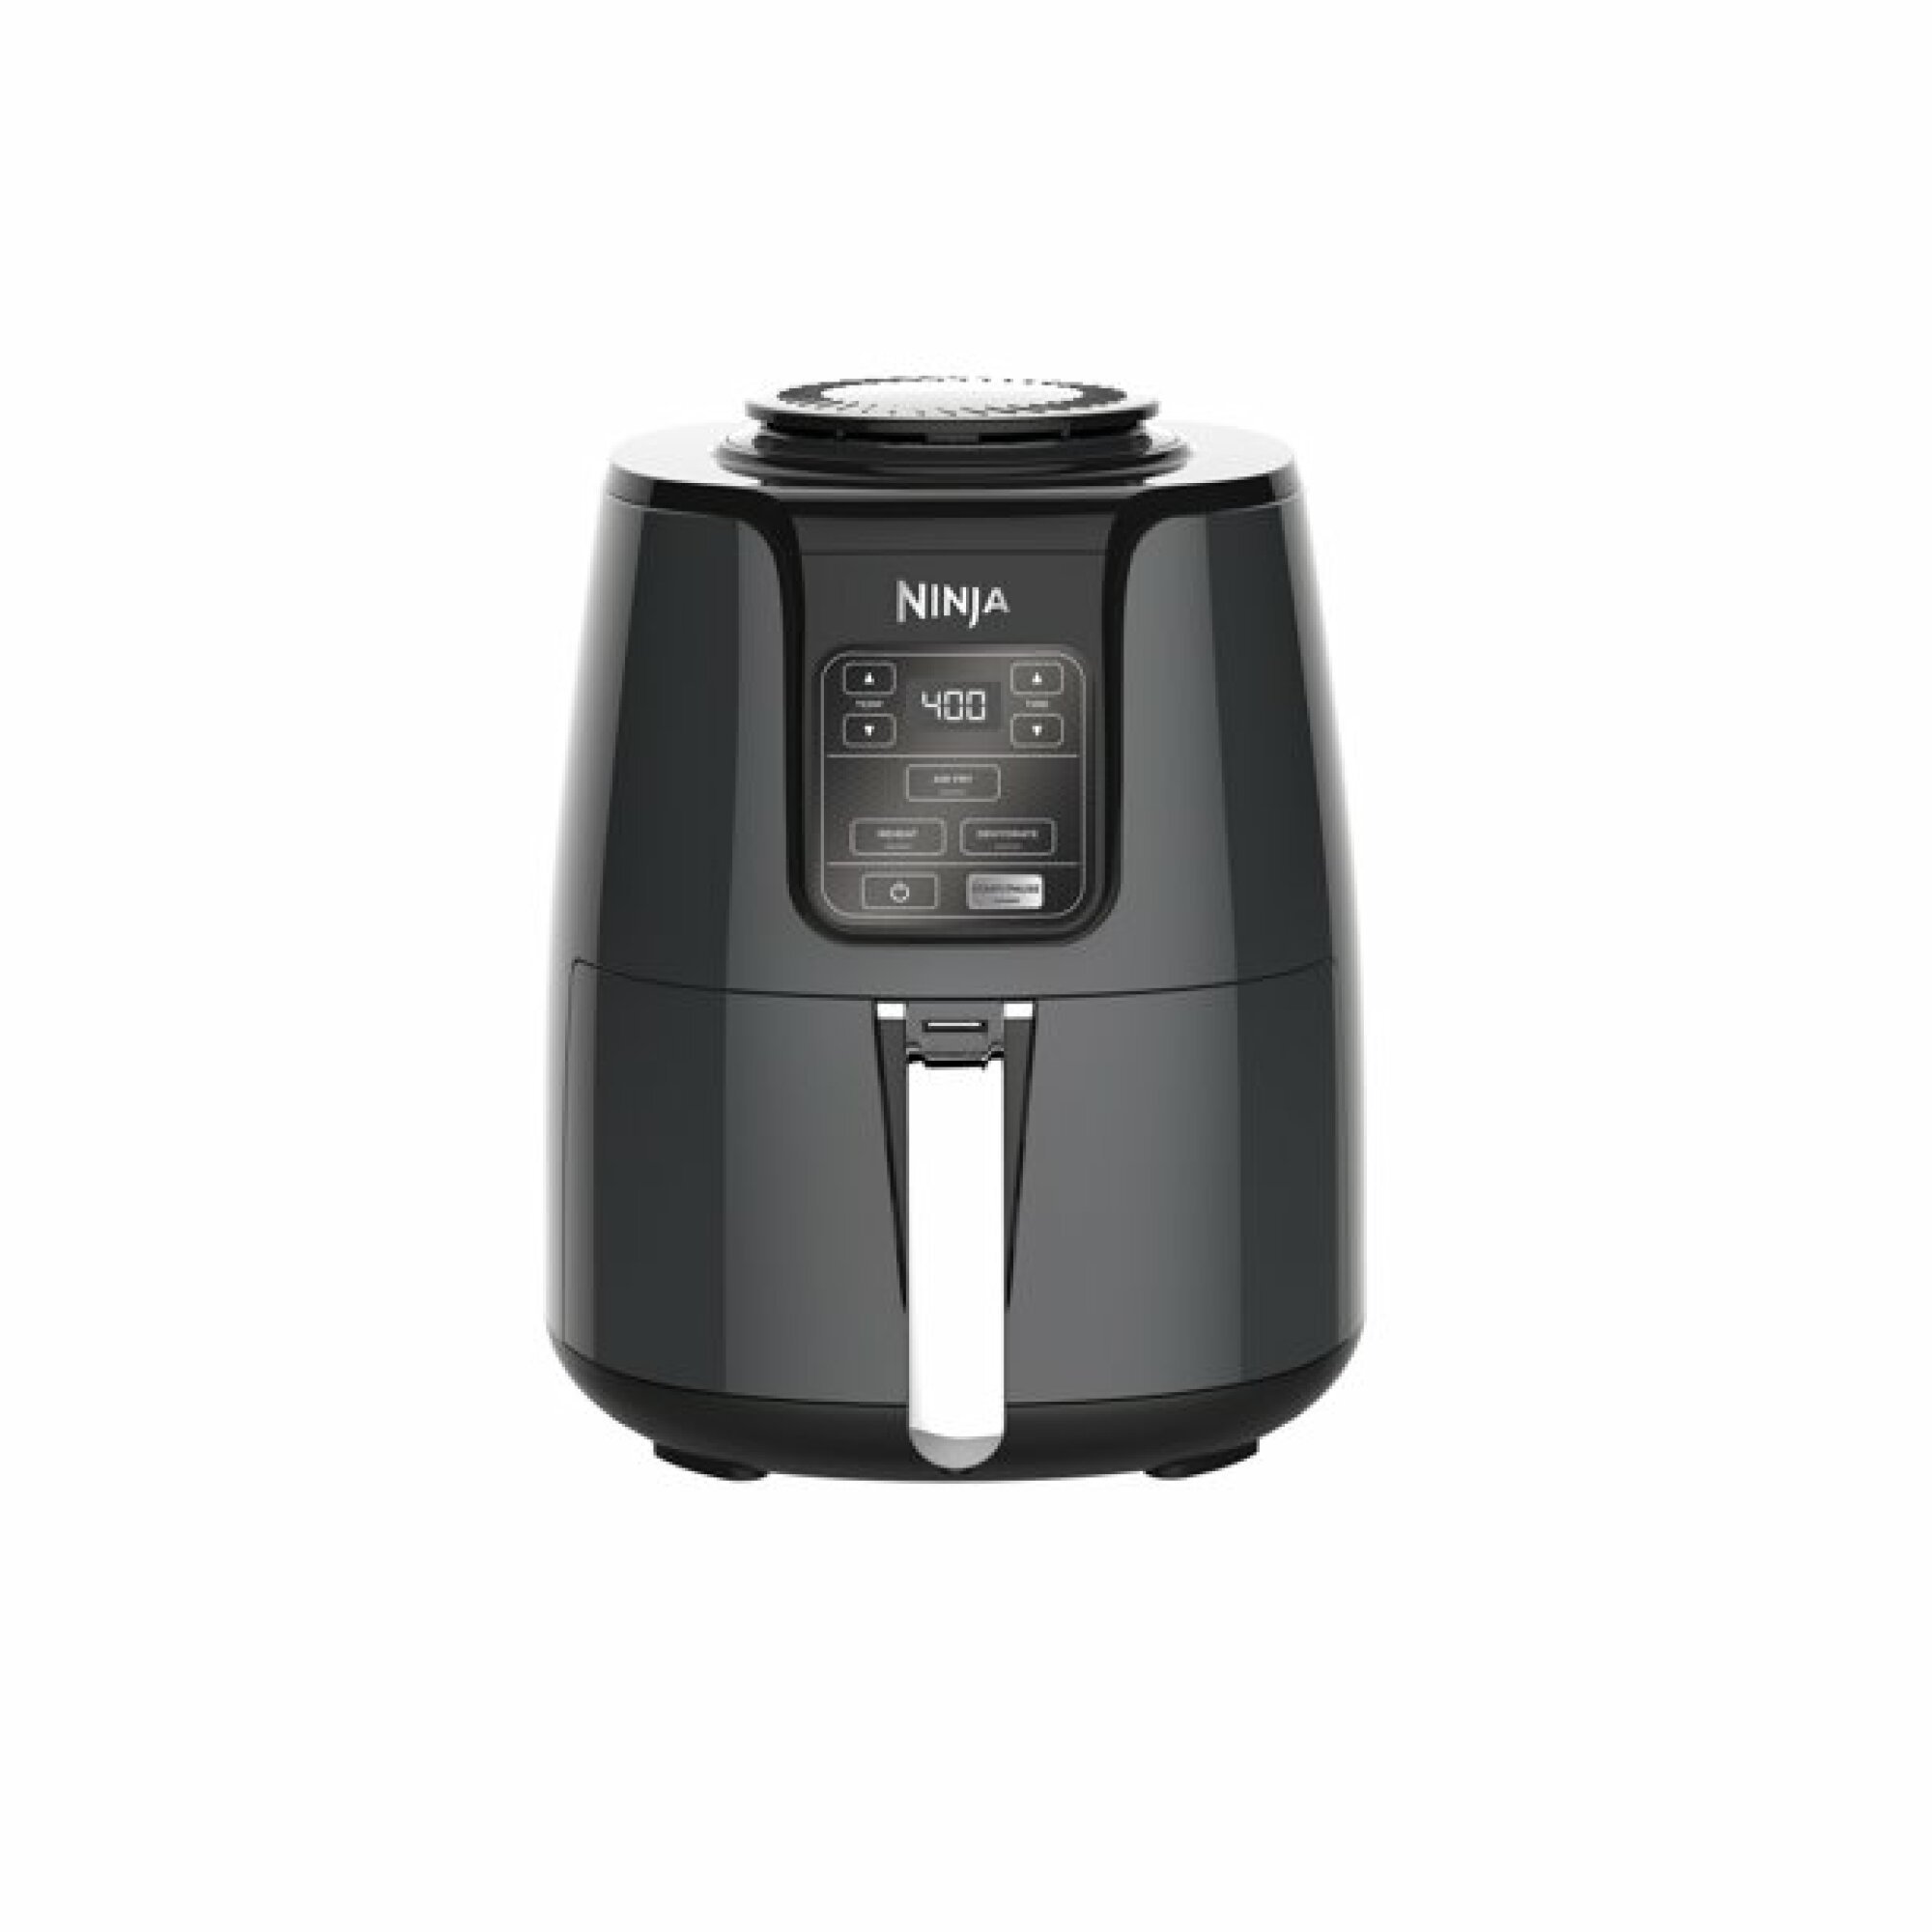 Black cylindrical air fryer with silver accents.